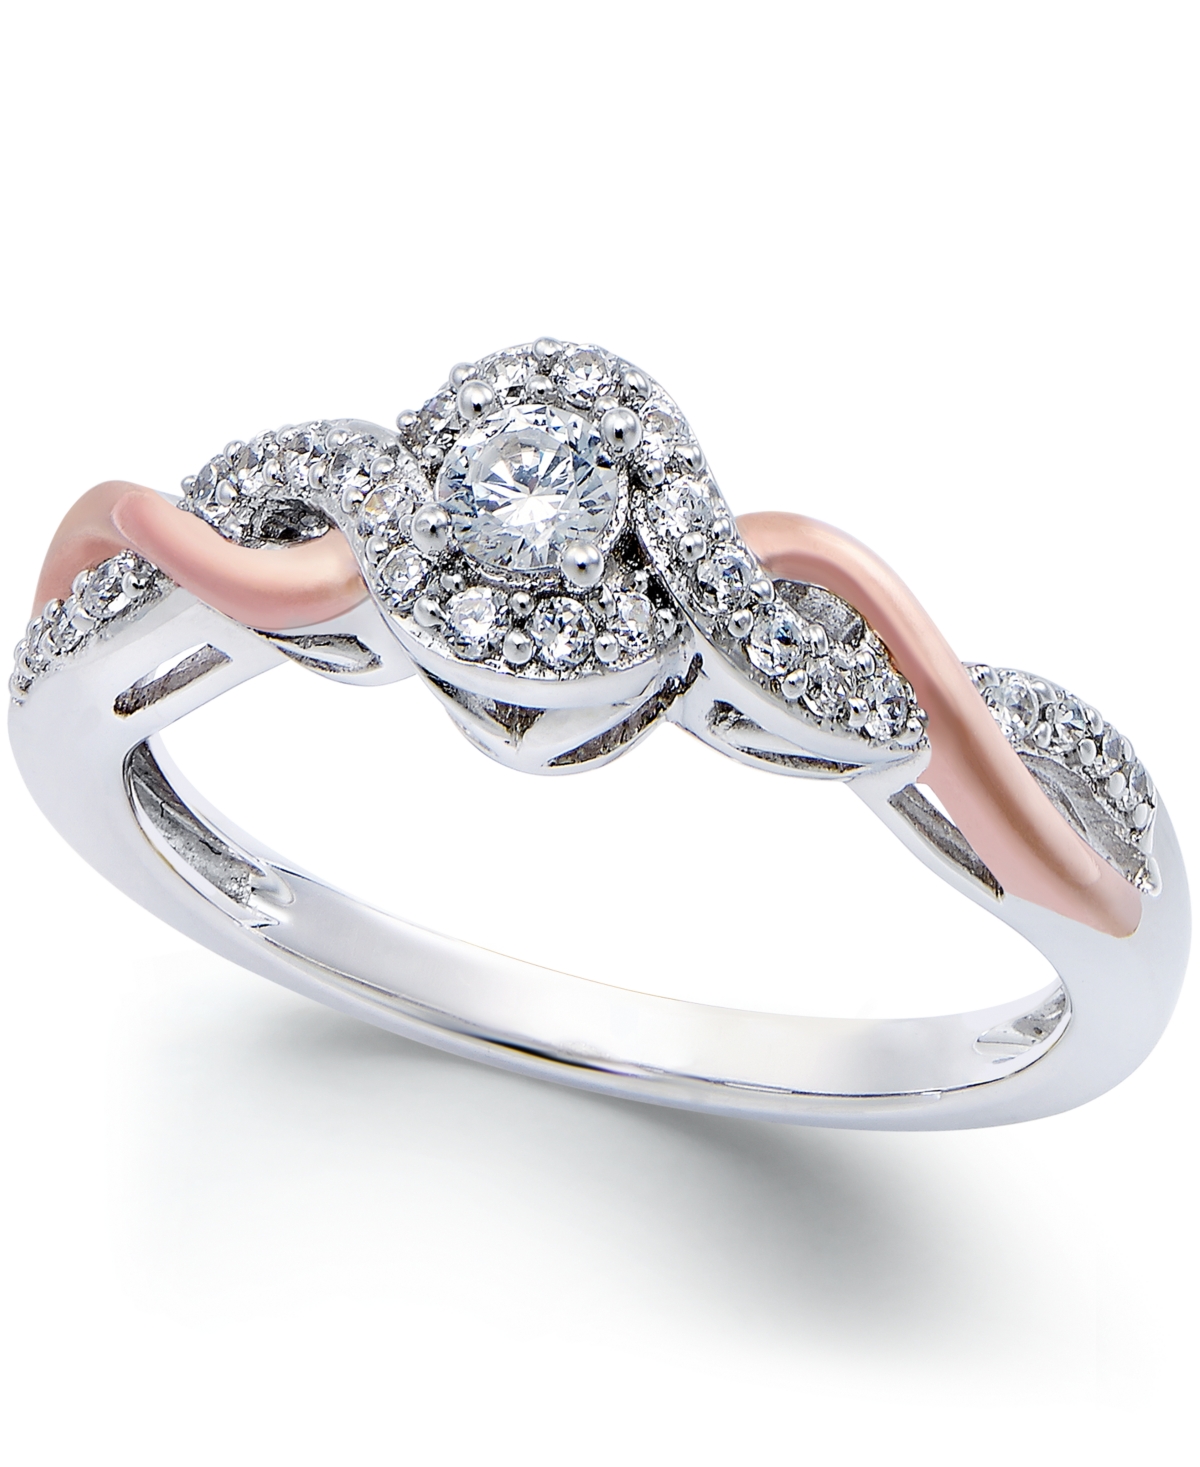 Diamond Twist Promise Ring in Sterling Silver and 14k Rose Gold (1/5 ct. t.w.) - Silver